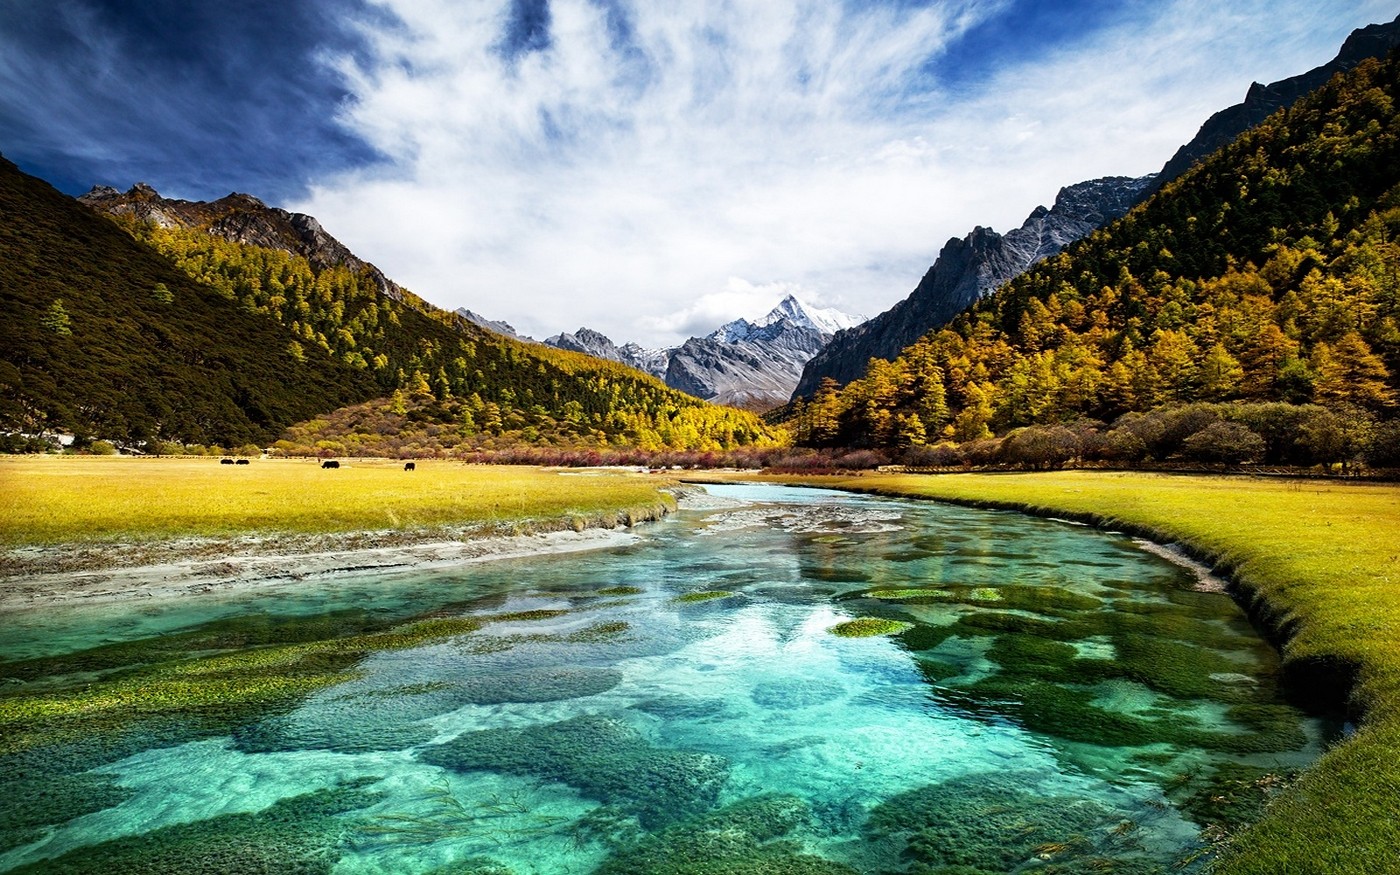 General 1400x875 landscape nature fall river turquoise water mountains Tibet grass forest snowy peak trees clouds Asia